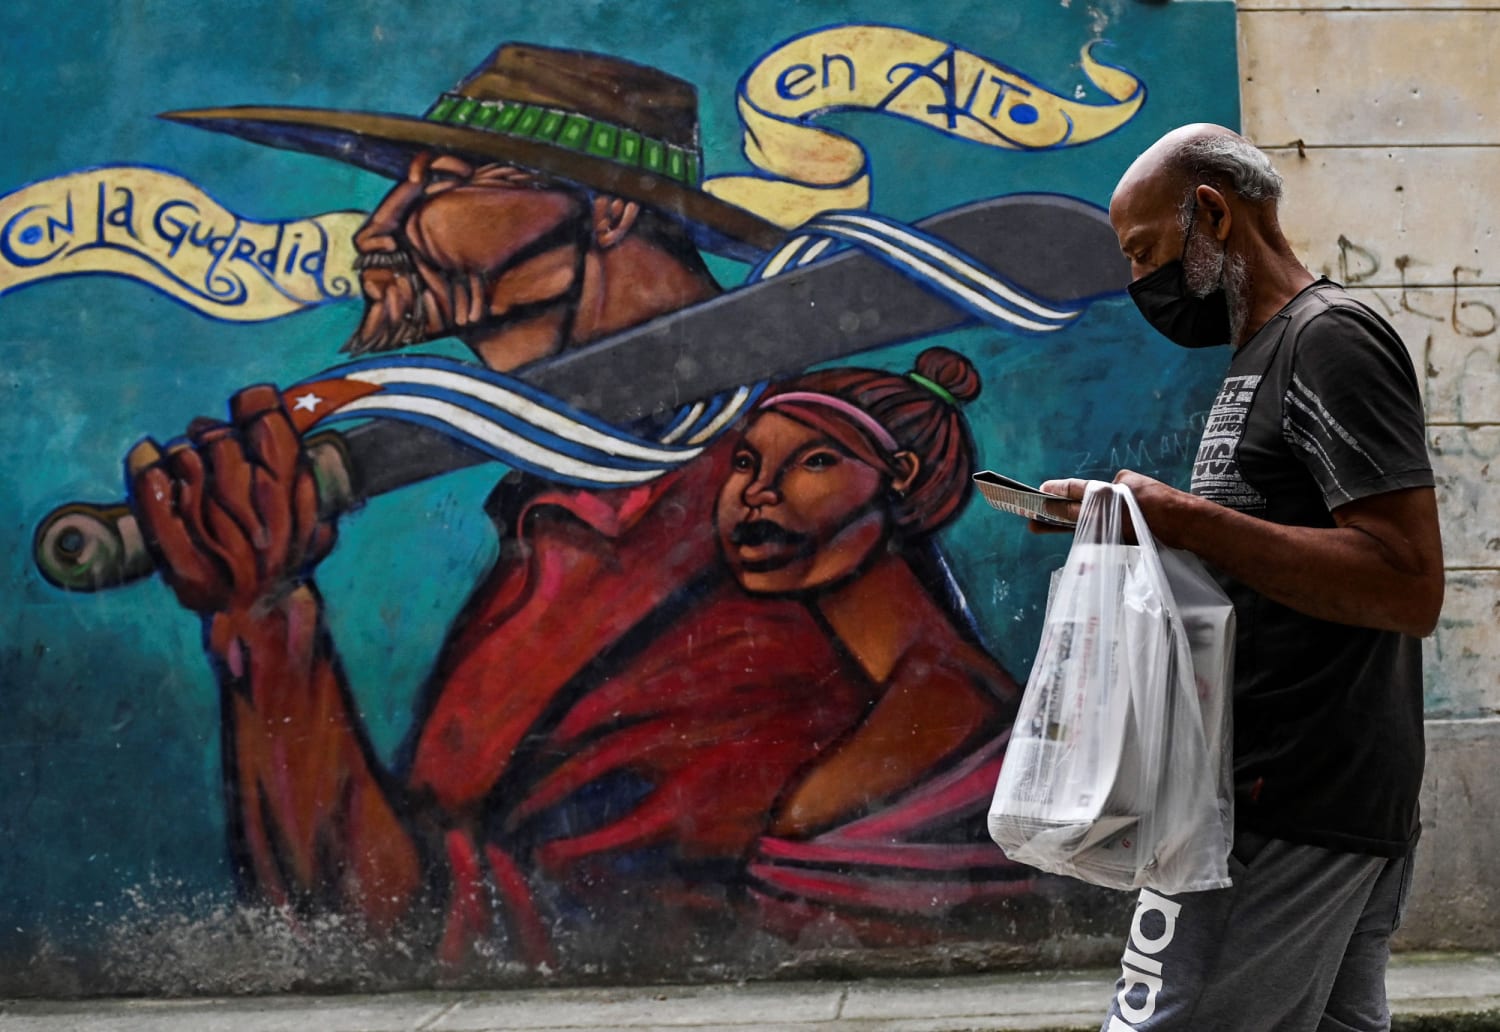 Tensions rise in Cuba: Activists vow to march, goverment says it won’t happen